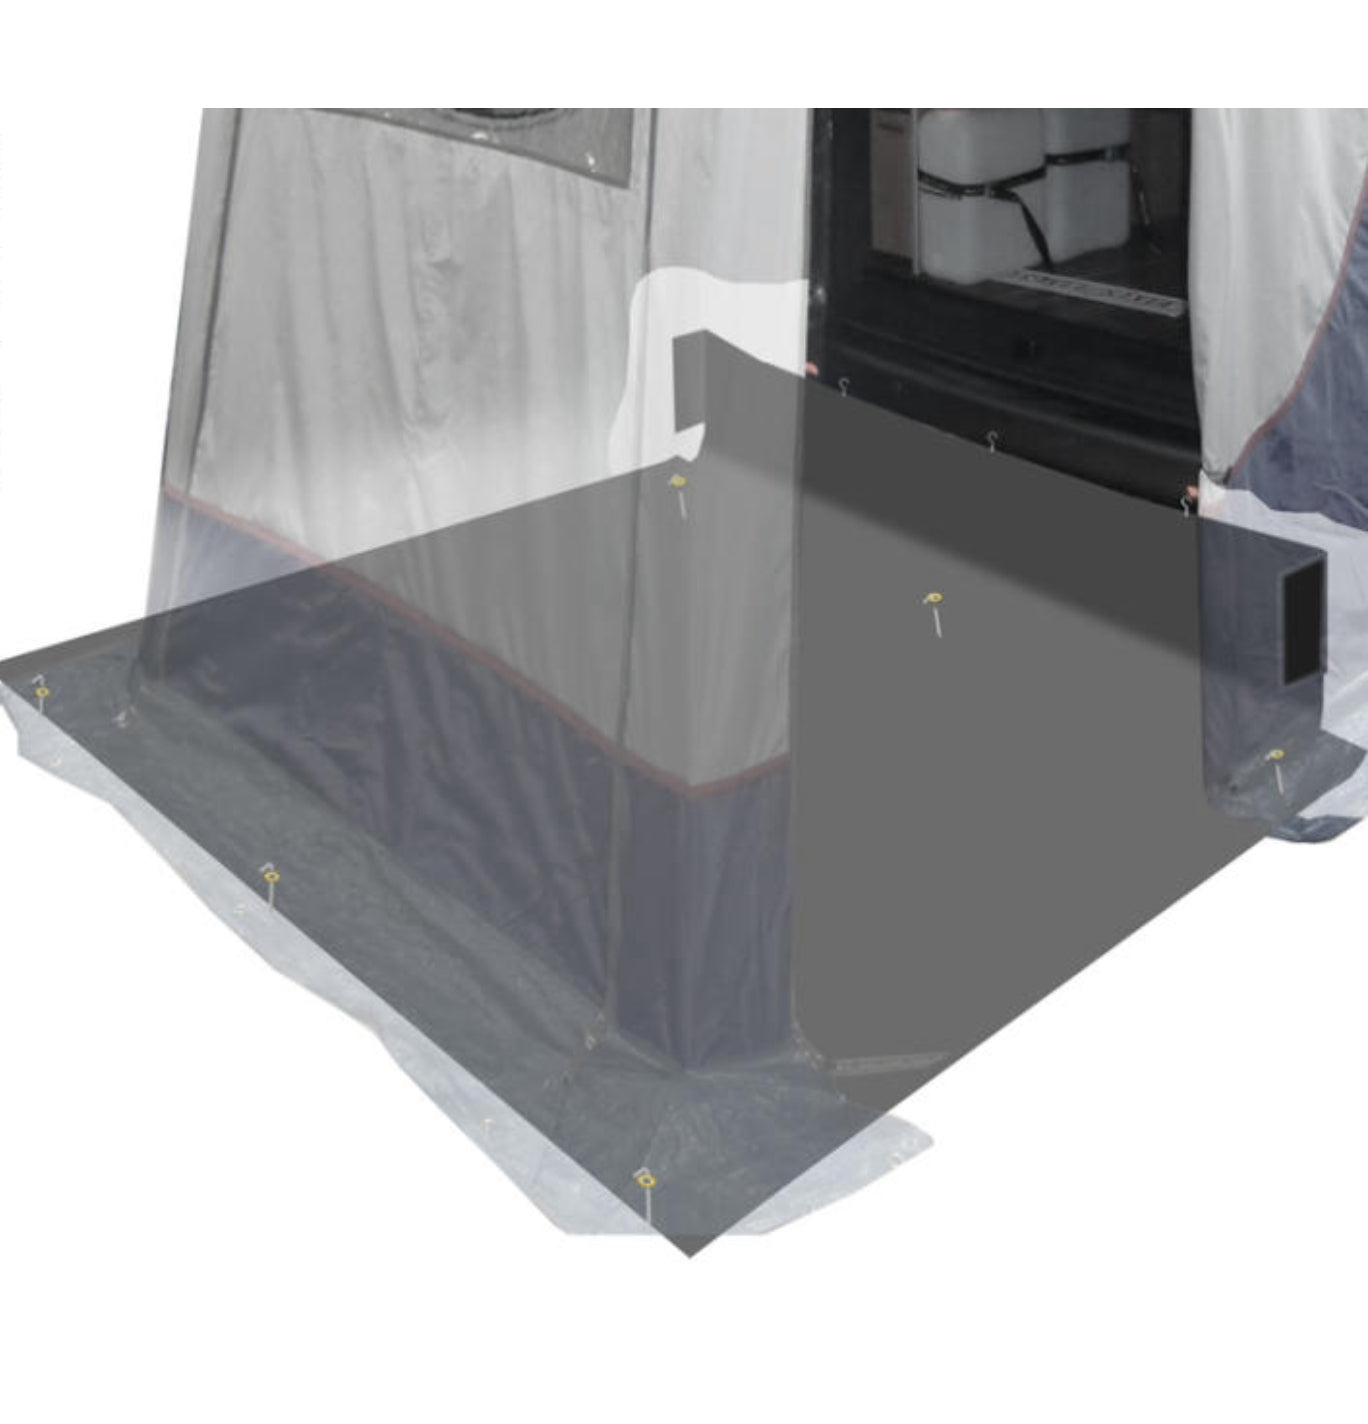 Reimo Update Cabin Tailgate Tent & Ground Sheet Bundle Image